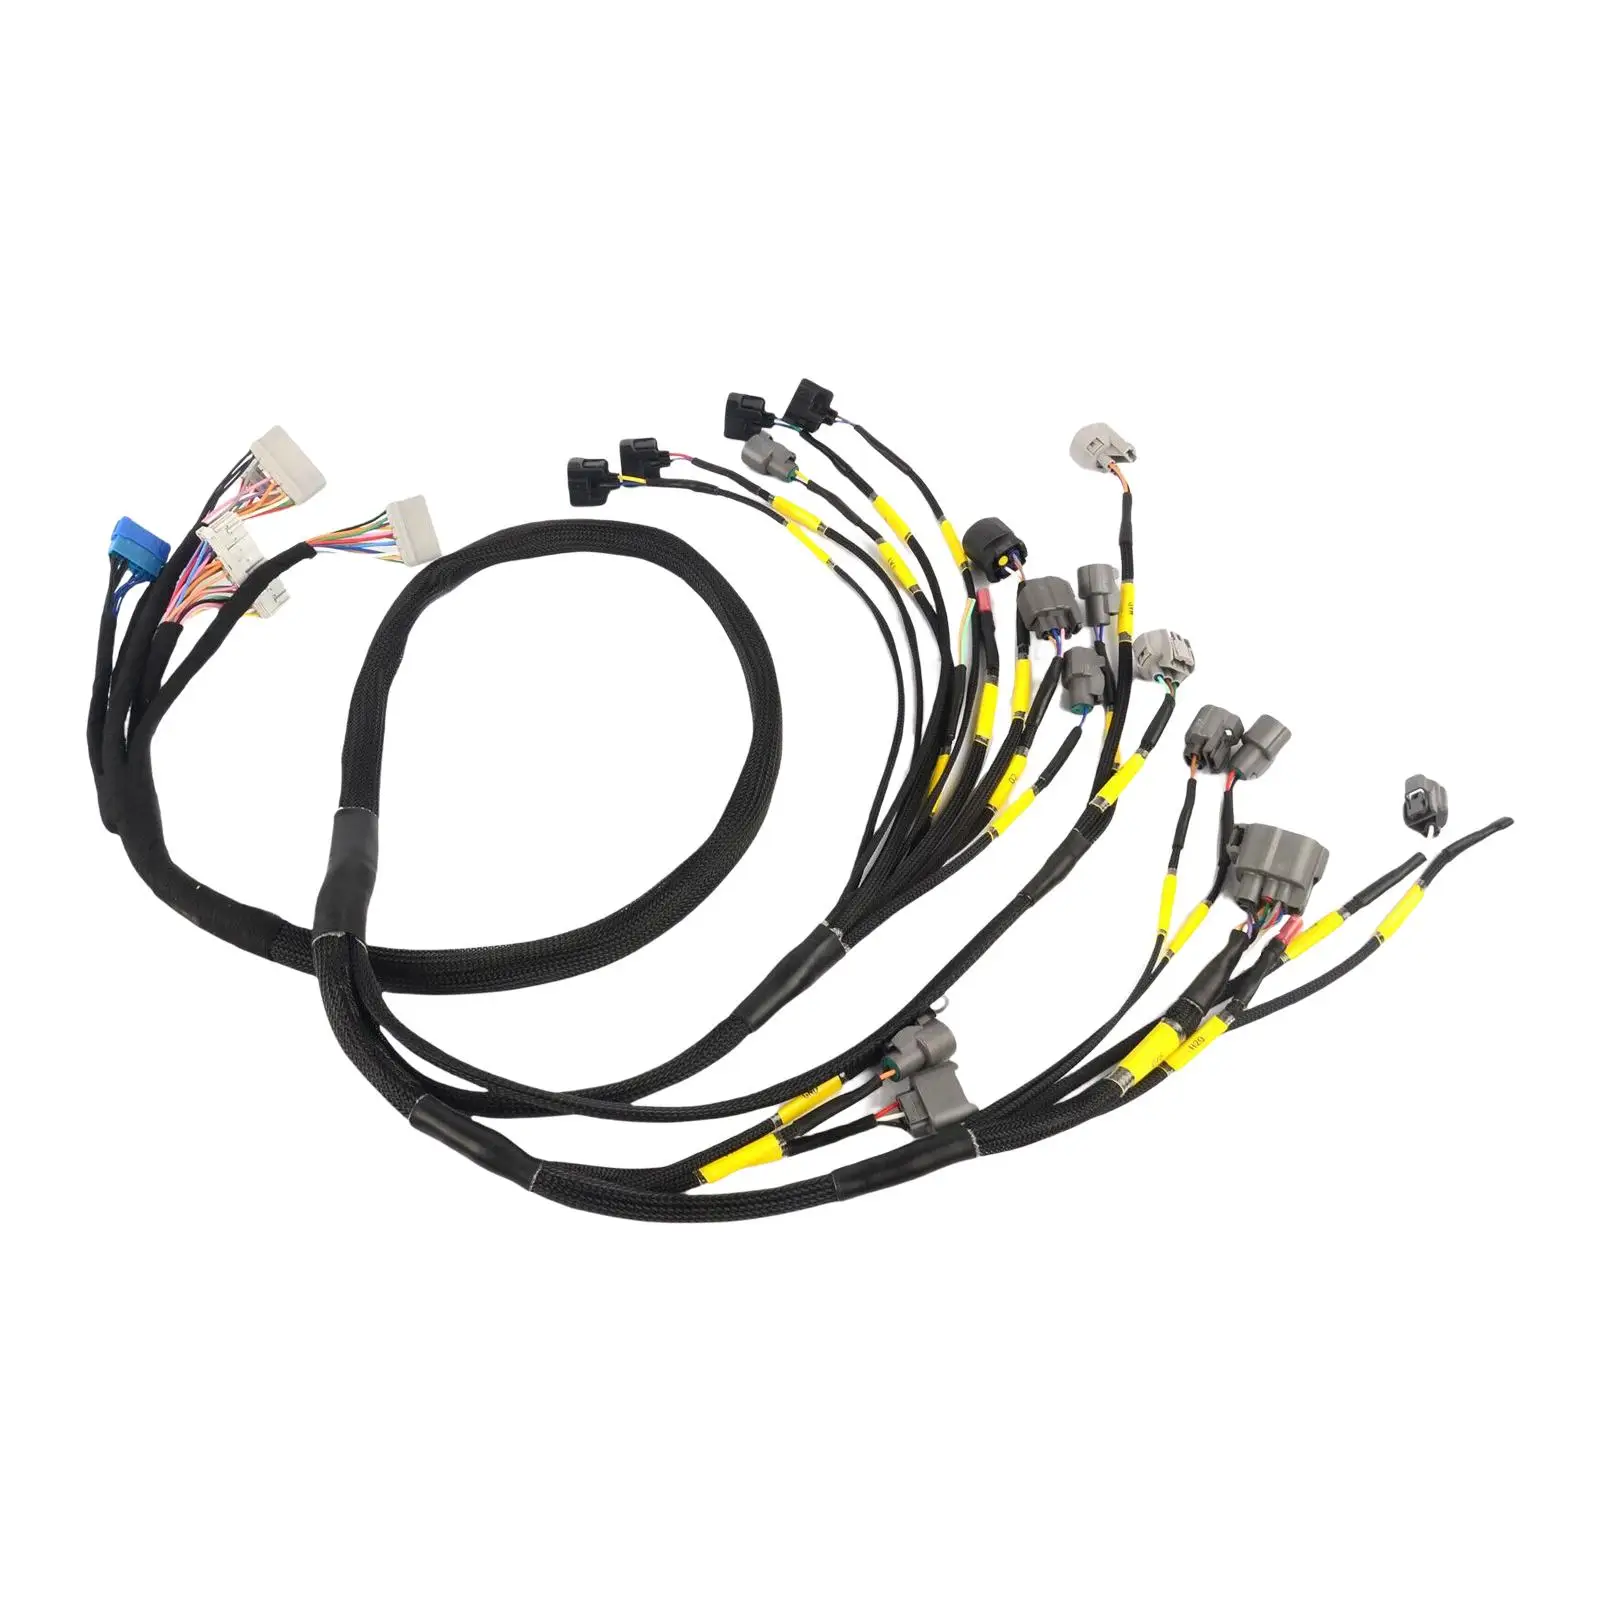 Engine Wiring Harness Cnch-Obd2-1 Automotive Accessory Replacement Easily Install Professional Durable Spare Parts